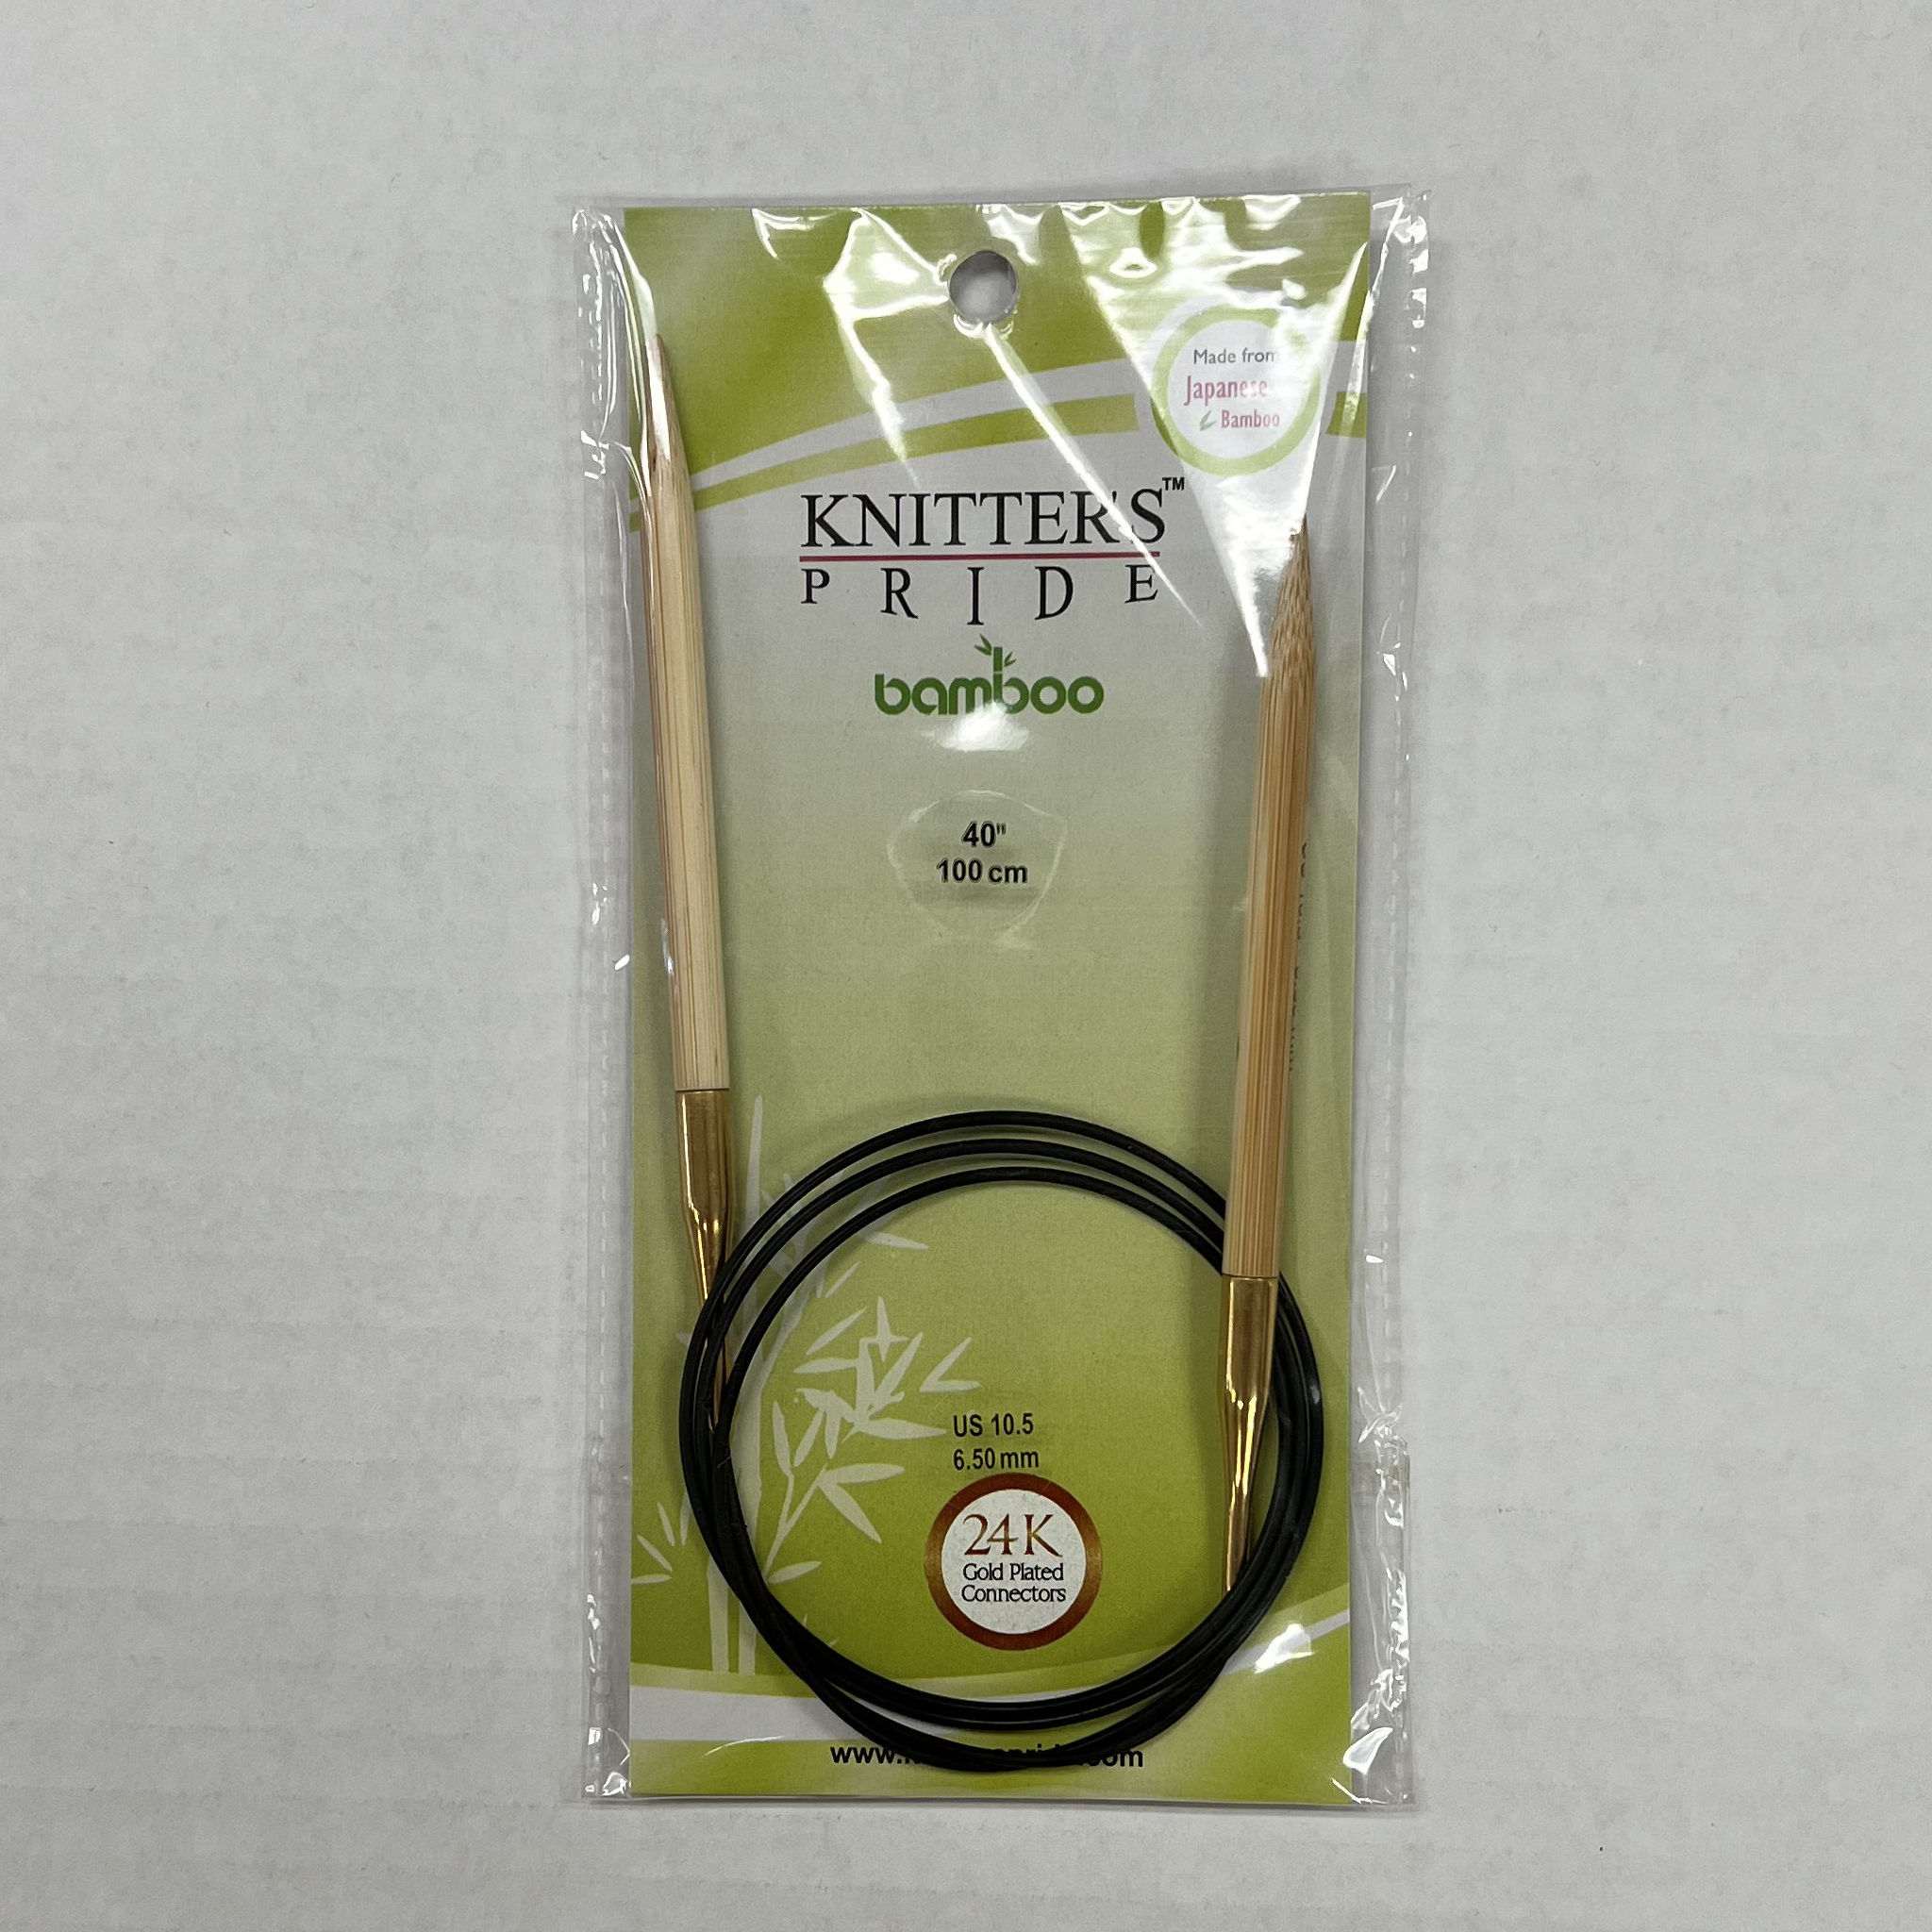 Pride　Stitching　Circular　A　Bamboo　–　6.50mm　Needles　Fixed　10.5　US　Knitter's　Witch